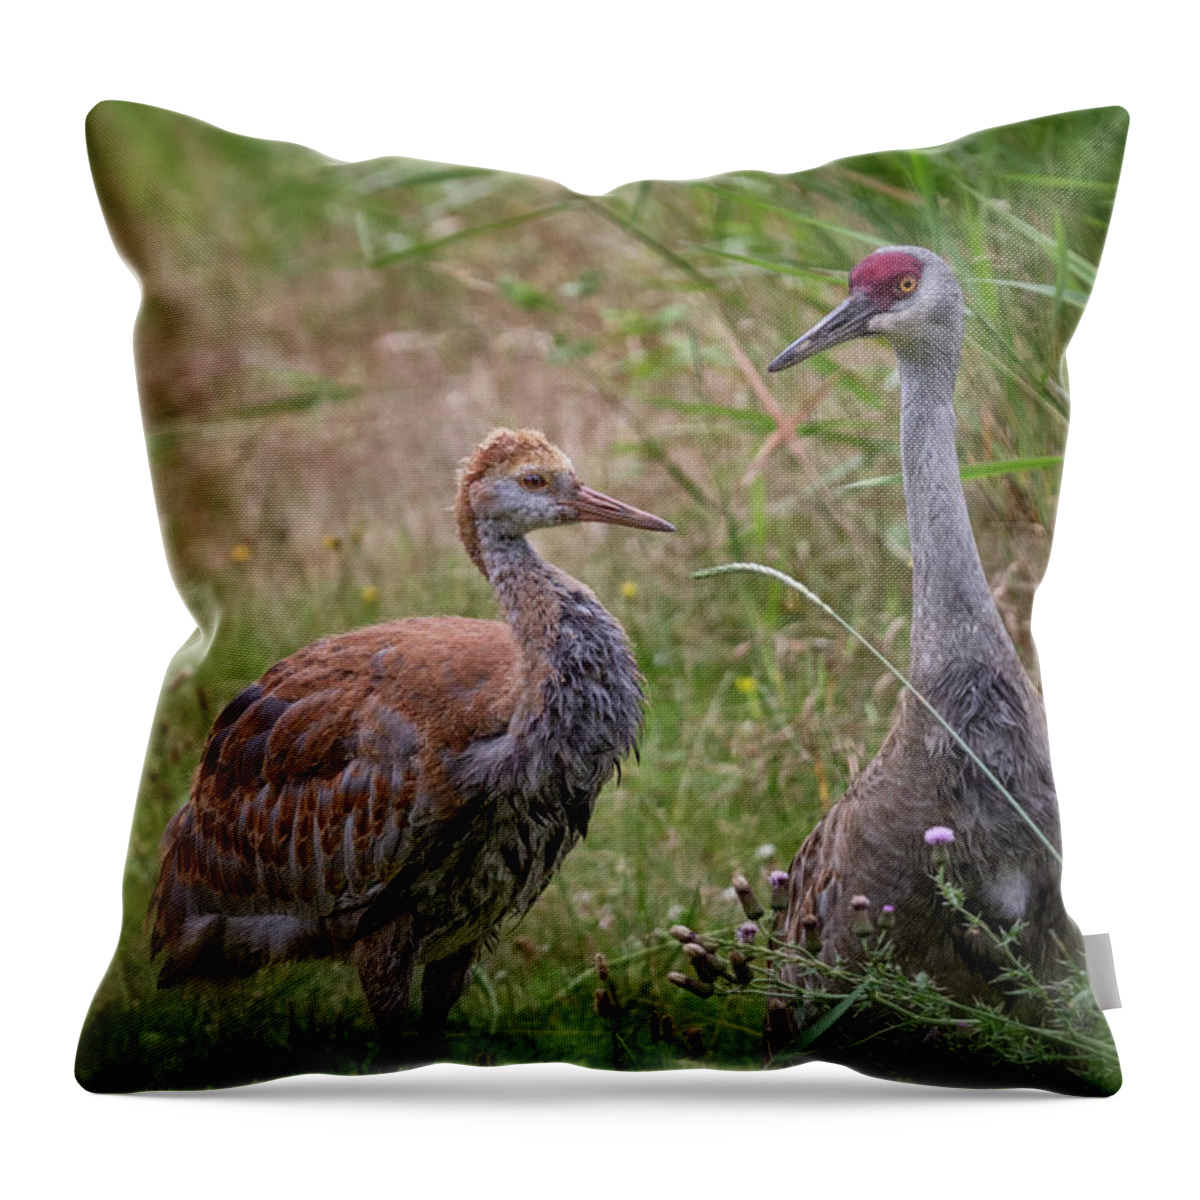 Sandhill Crane Throw Pillow featuring the photograph Mother And Child by Randy Hall